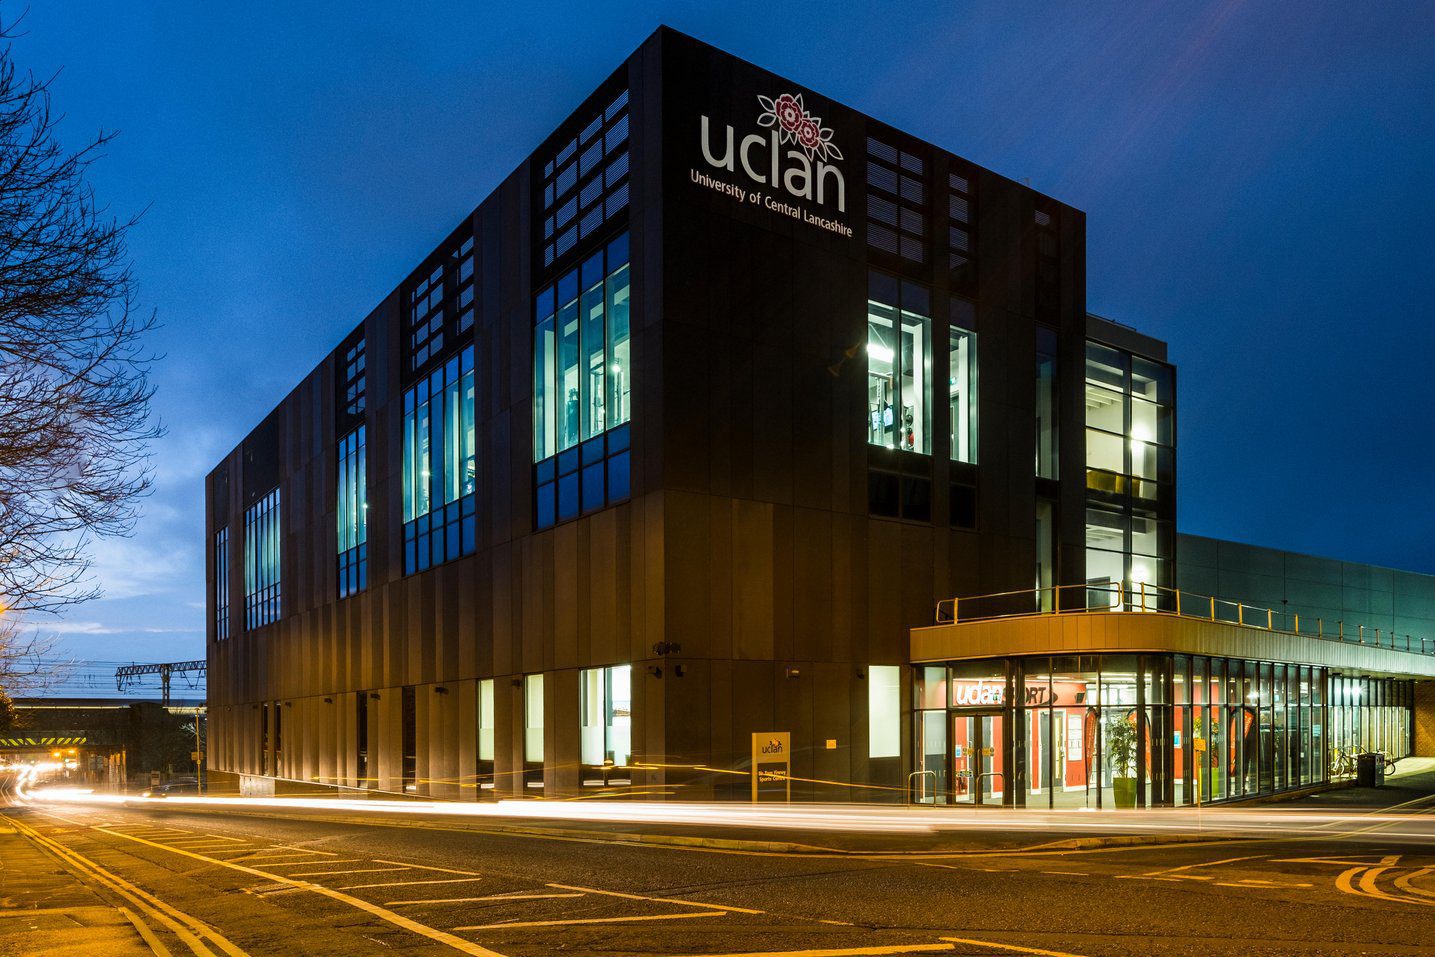 FD1XTC The Sir Tom Finney Sports Centre at the University of Central Lancashire (UCLAN) in Preston